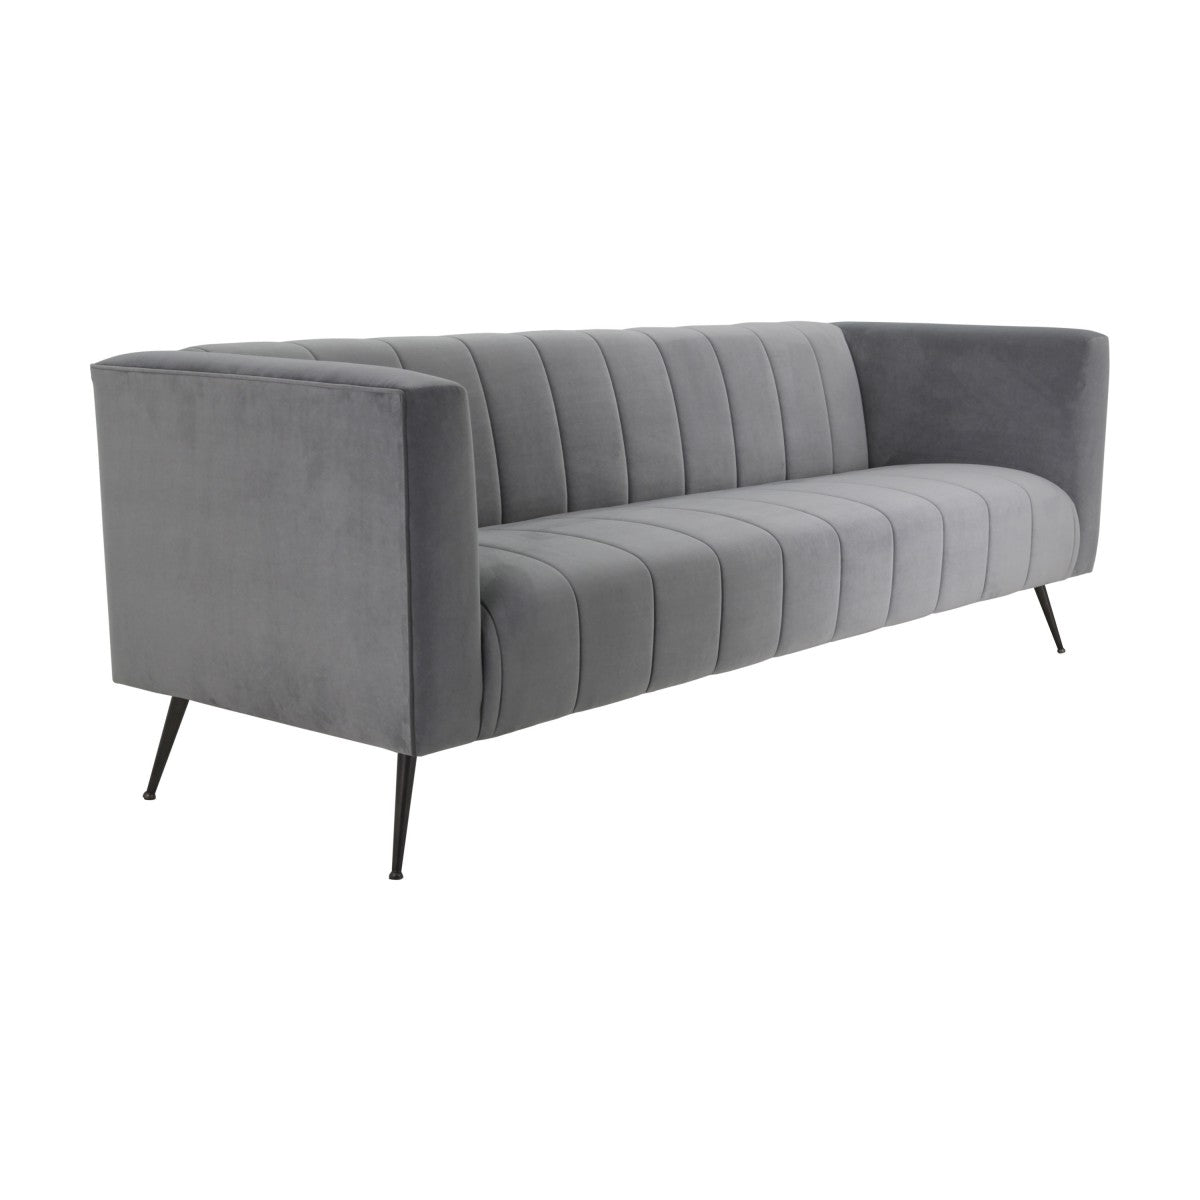 Nubes Bespoke Upholstered Modern Style Four Seater Sofa MS625F Custom Made To Order